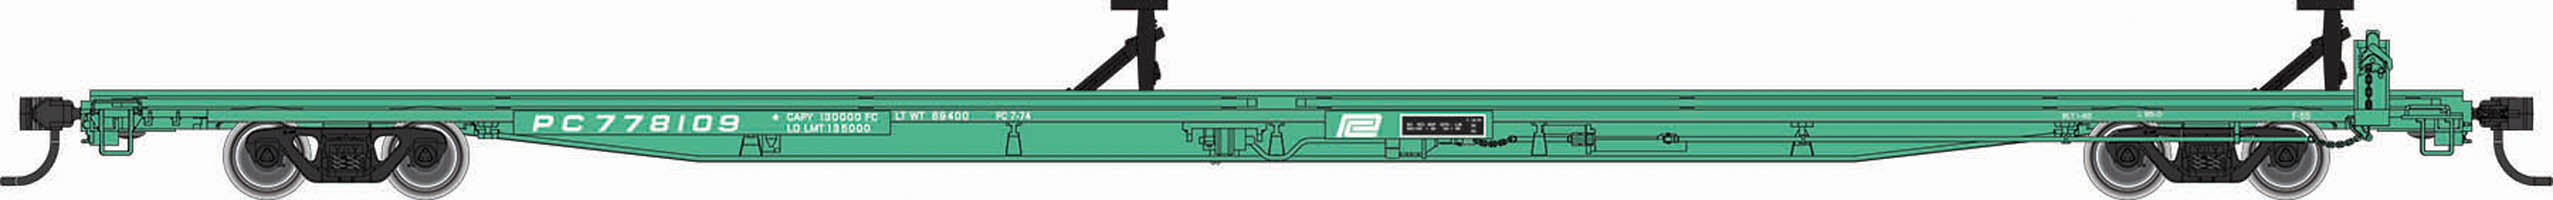 Drawing of green flatcar with white background